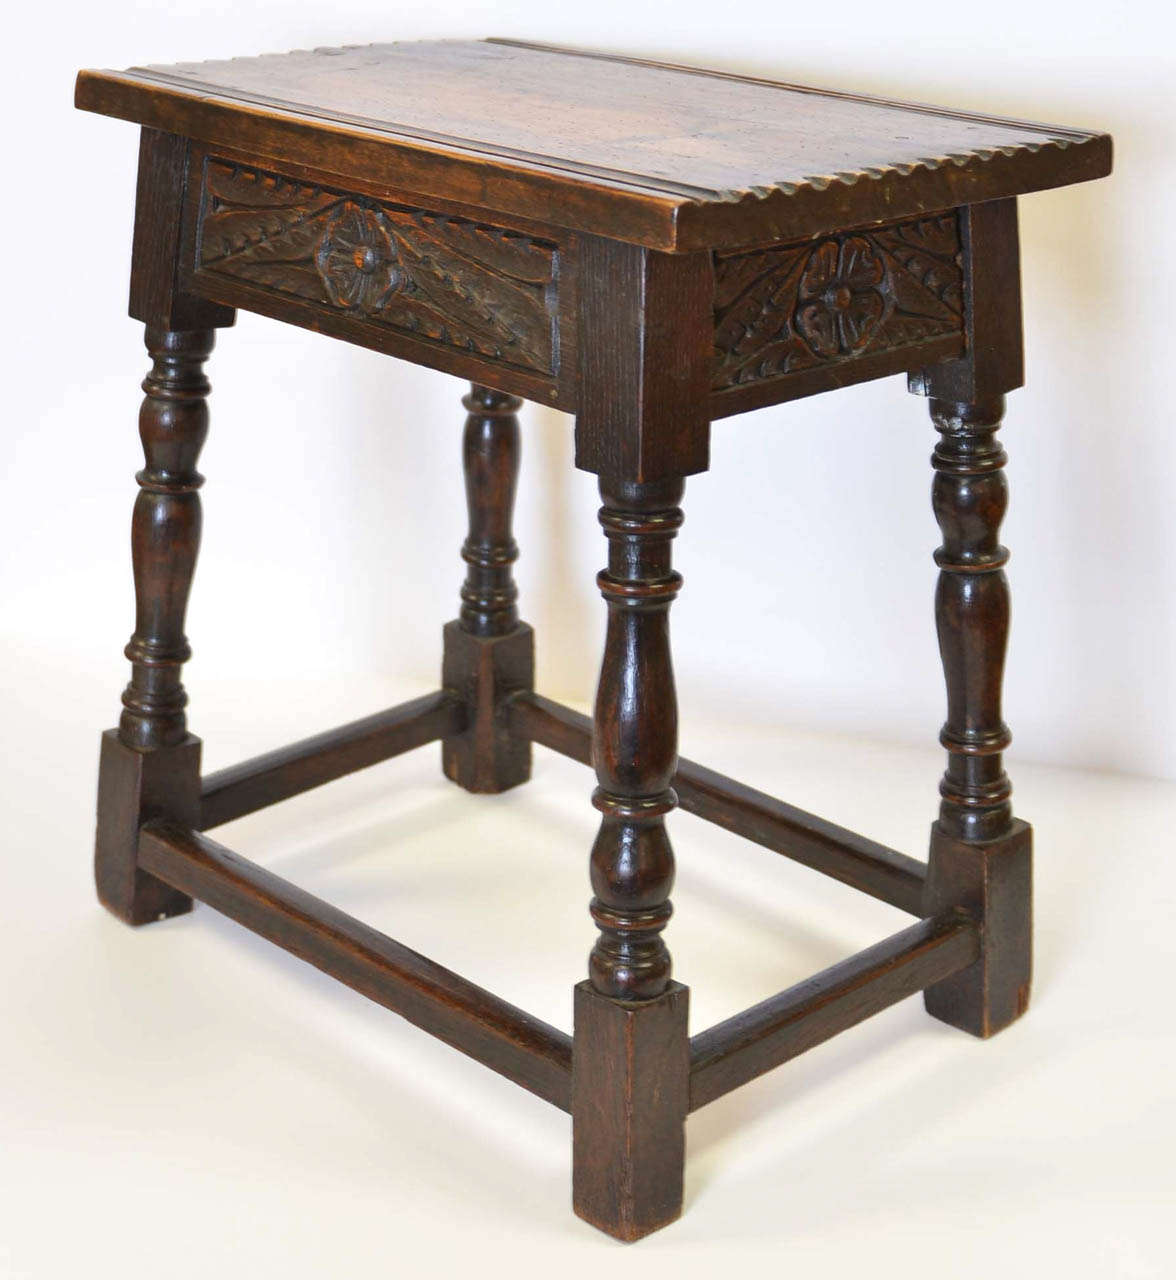 English Oak joint stool with beautiful carvings on all for sides.  From Enlgand circa 1890.

Item # JF103